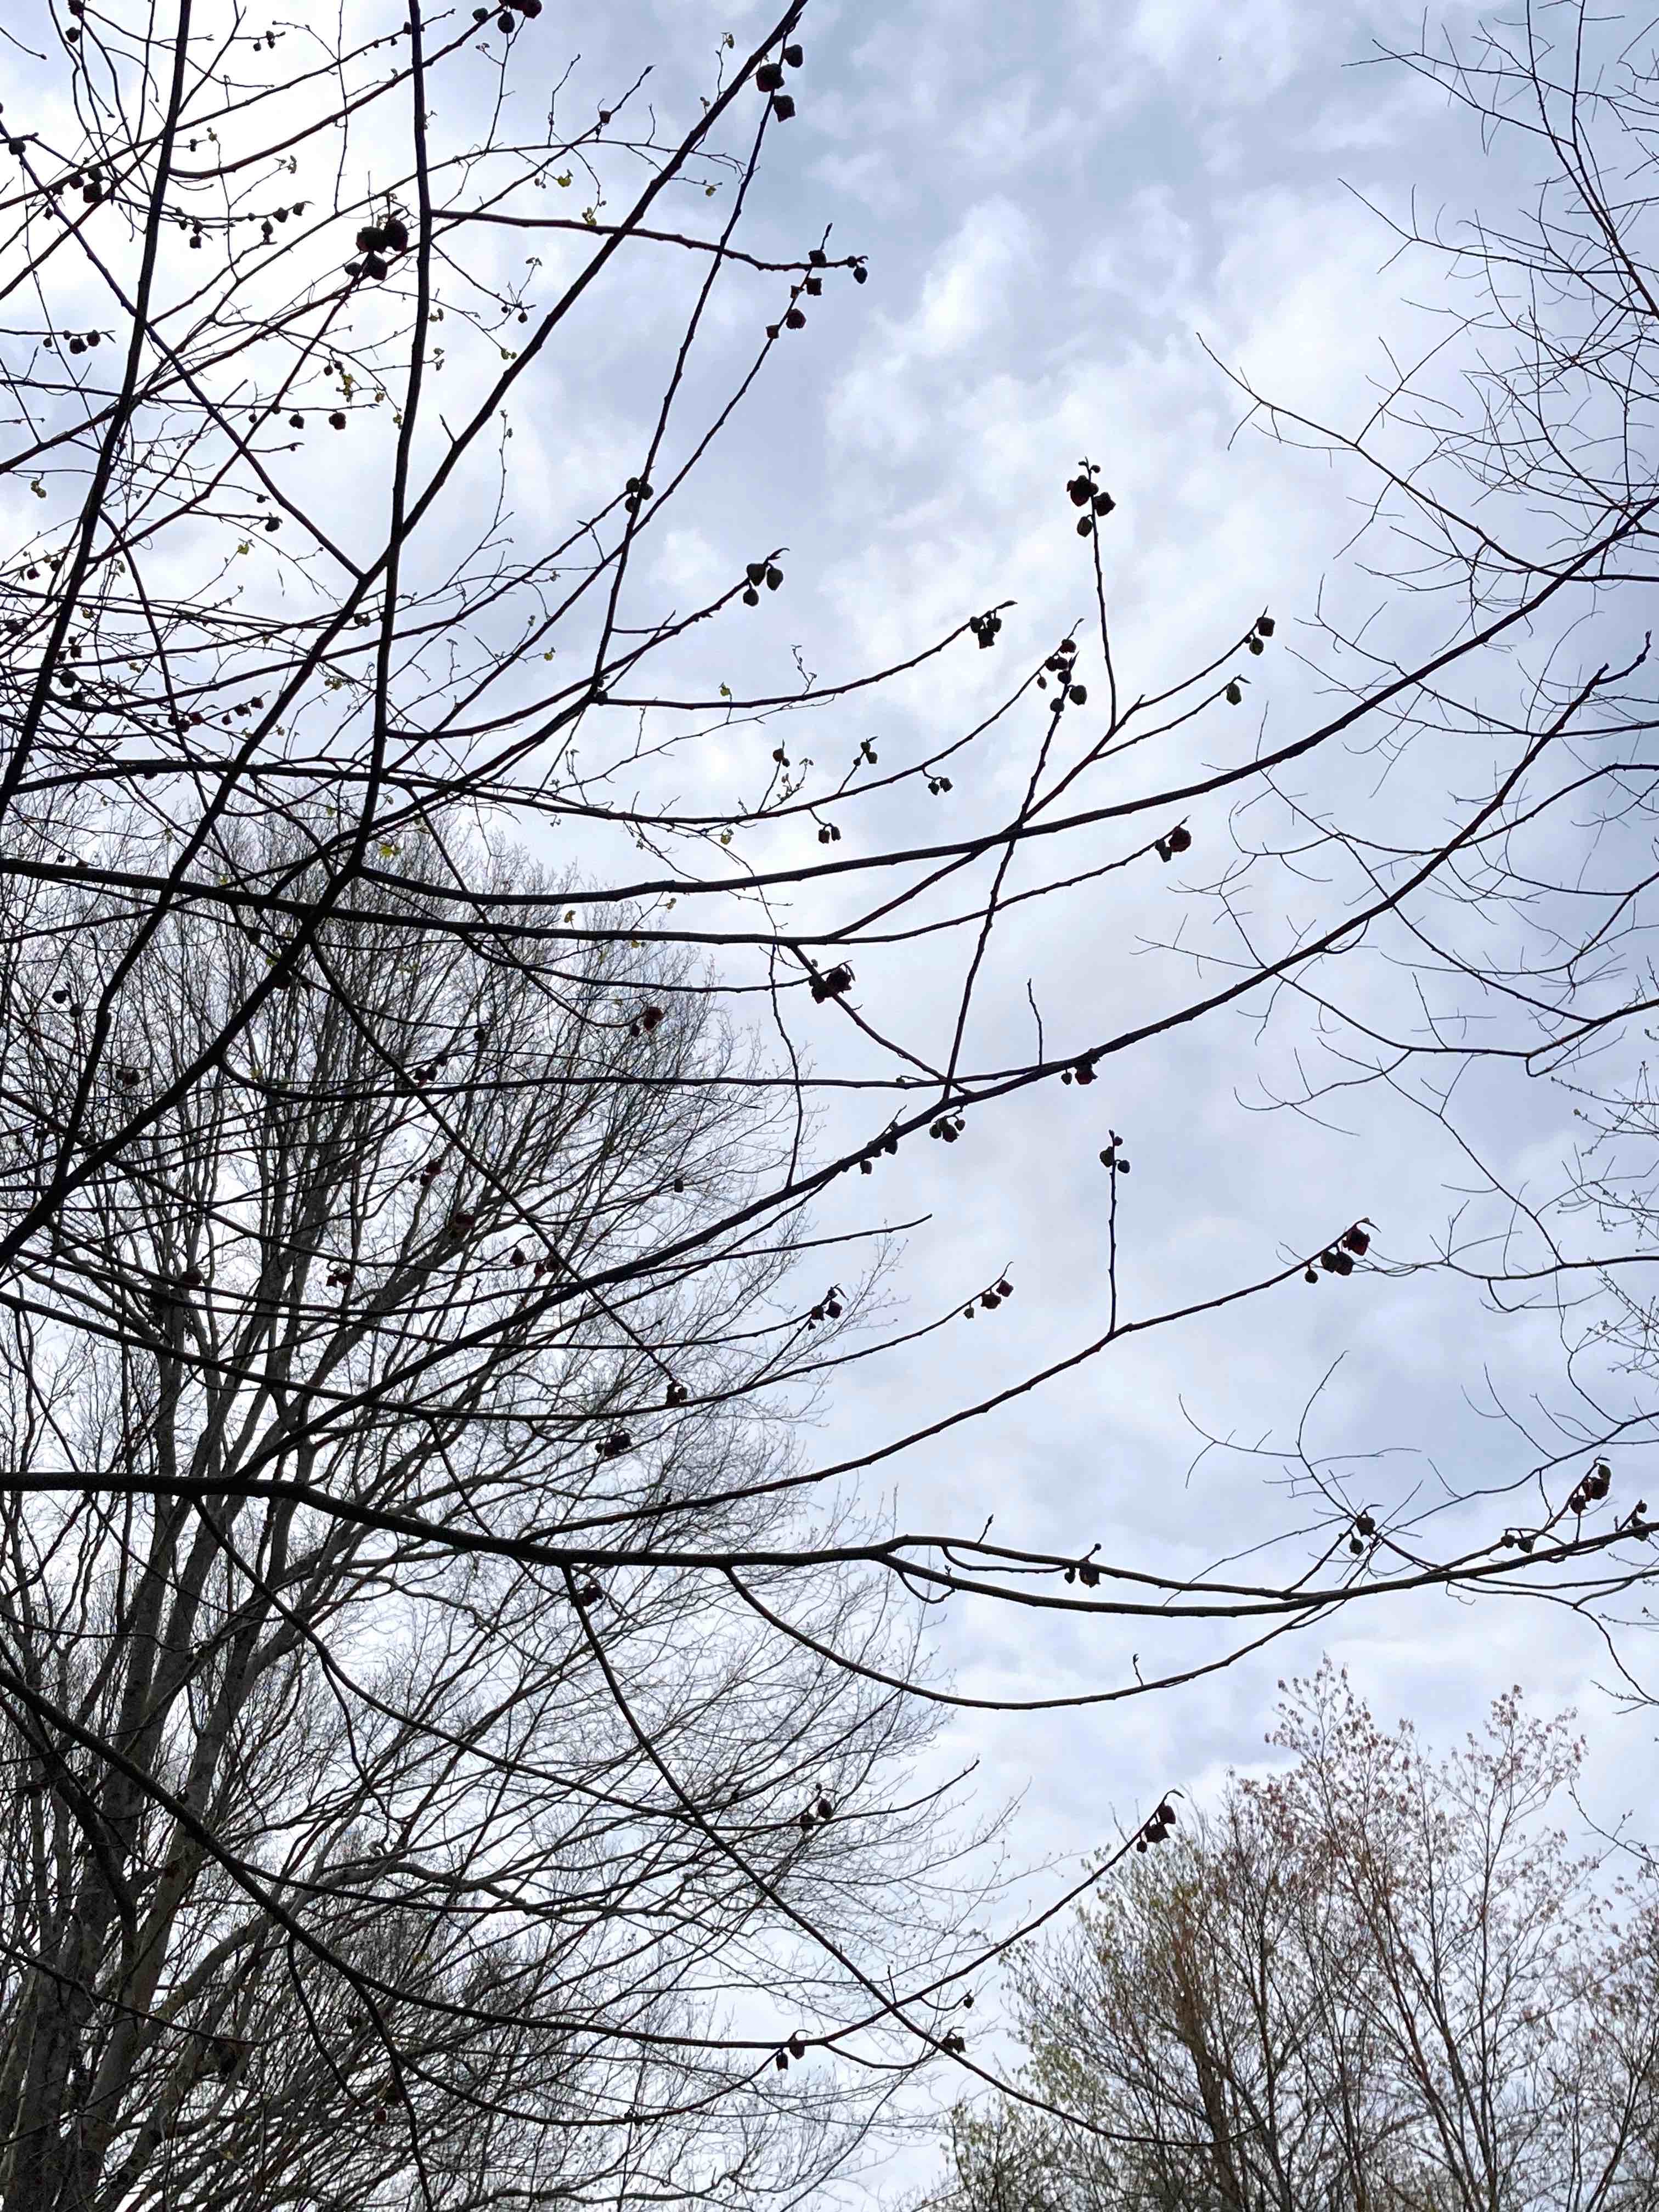 The Scientific Name is Asimina triloba. You will likely hear them called Pawpaw. This picture shows the The purple-brown flowers appear before the leaves in spring and are easily spotted hanging down from the branches. of Asimina triloba